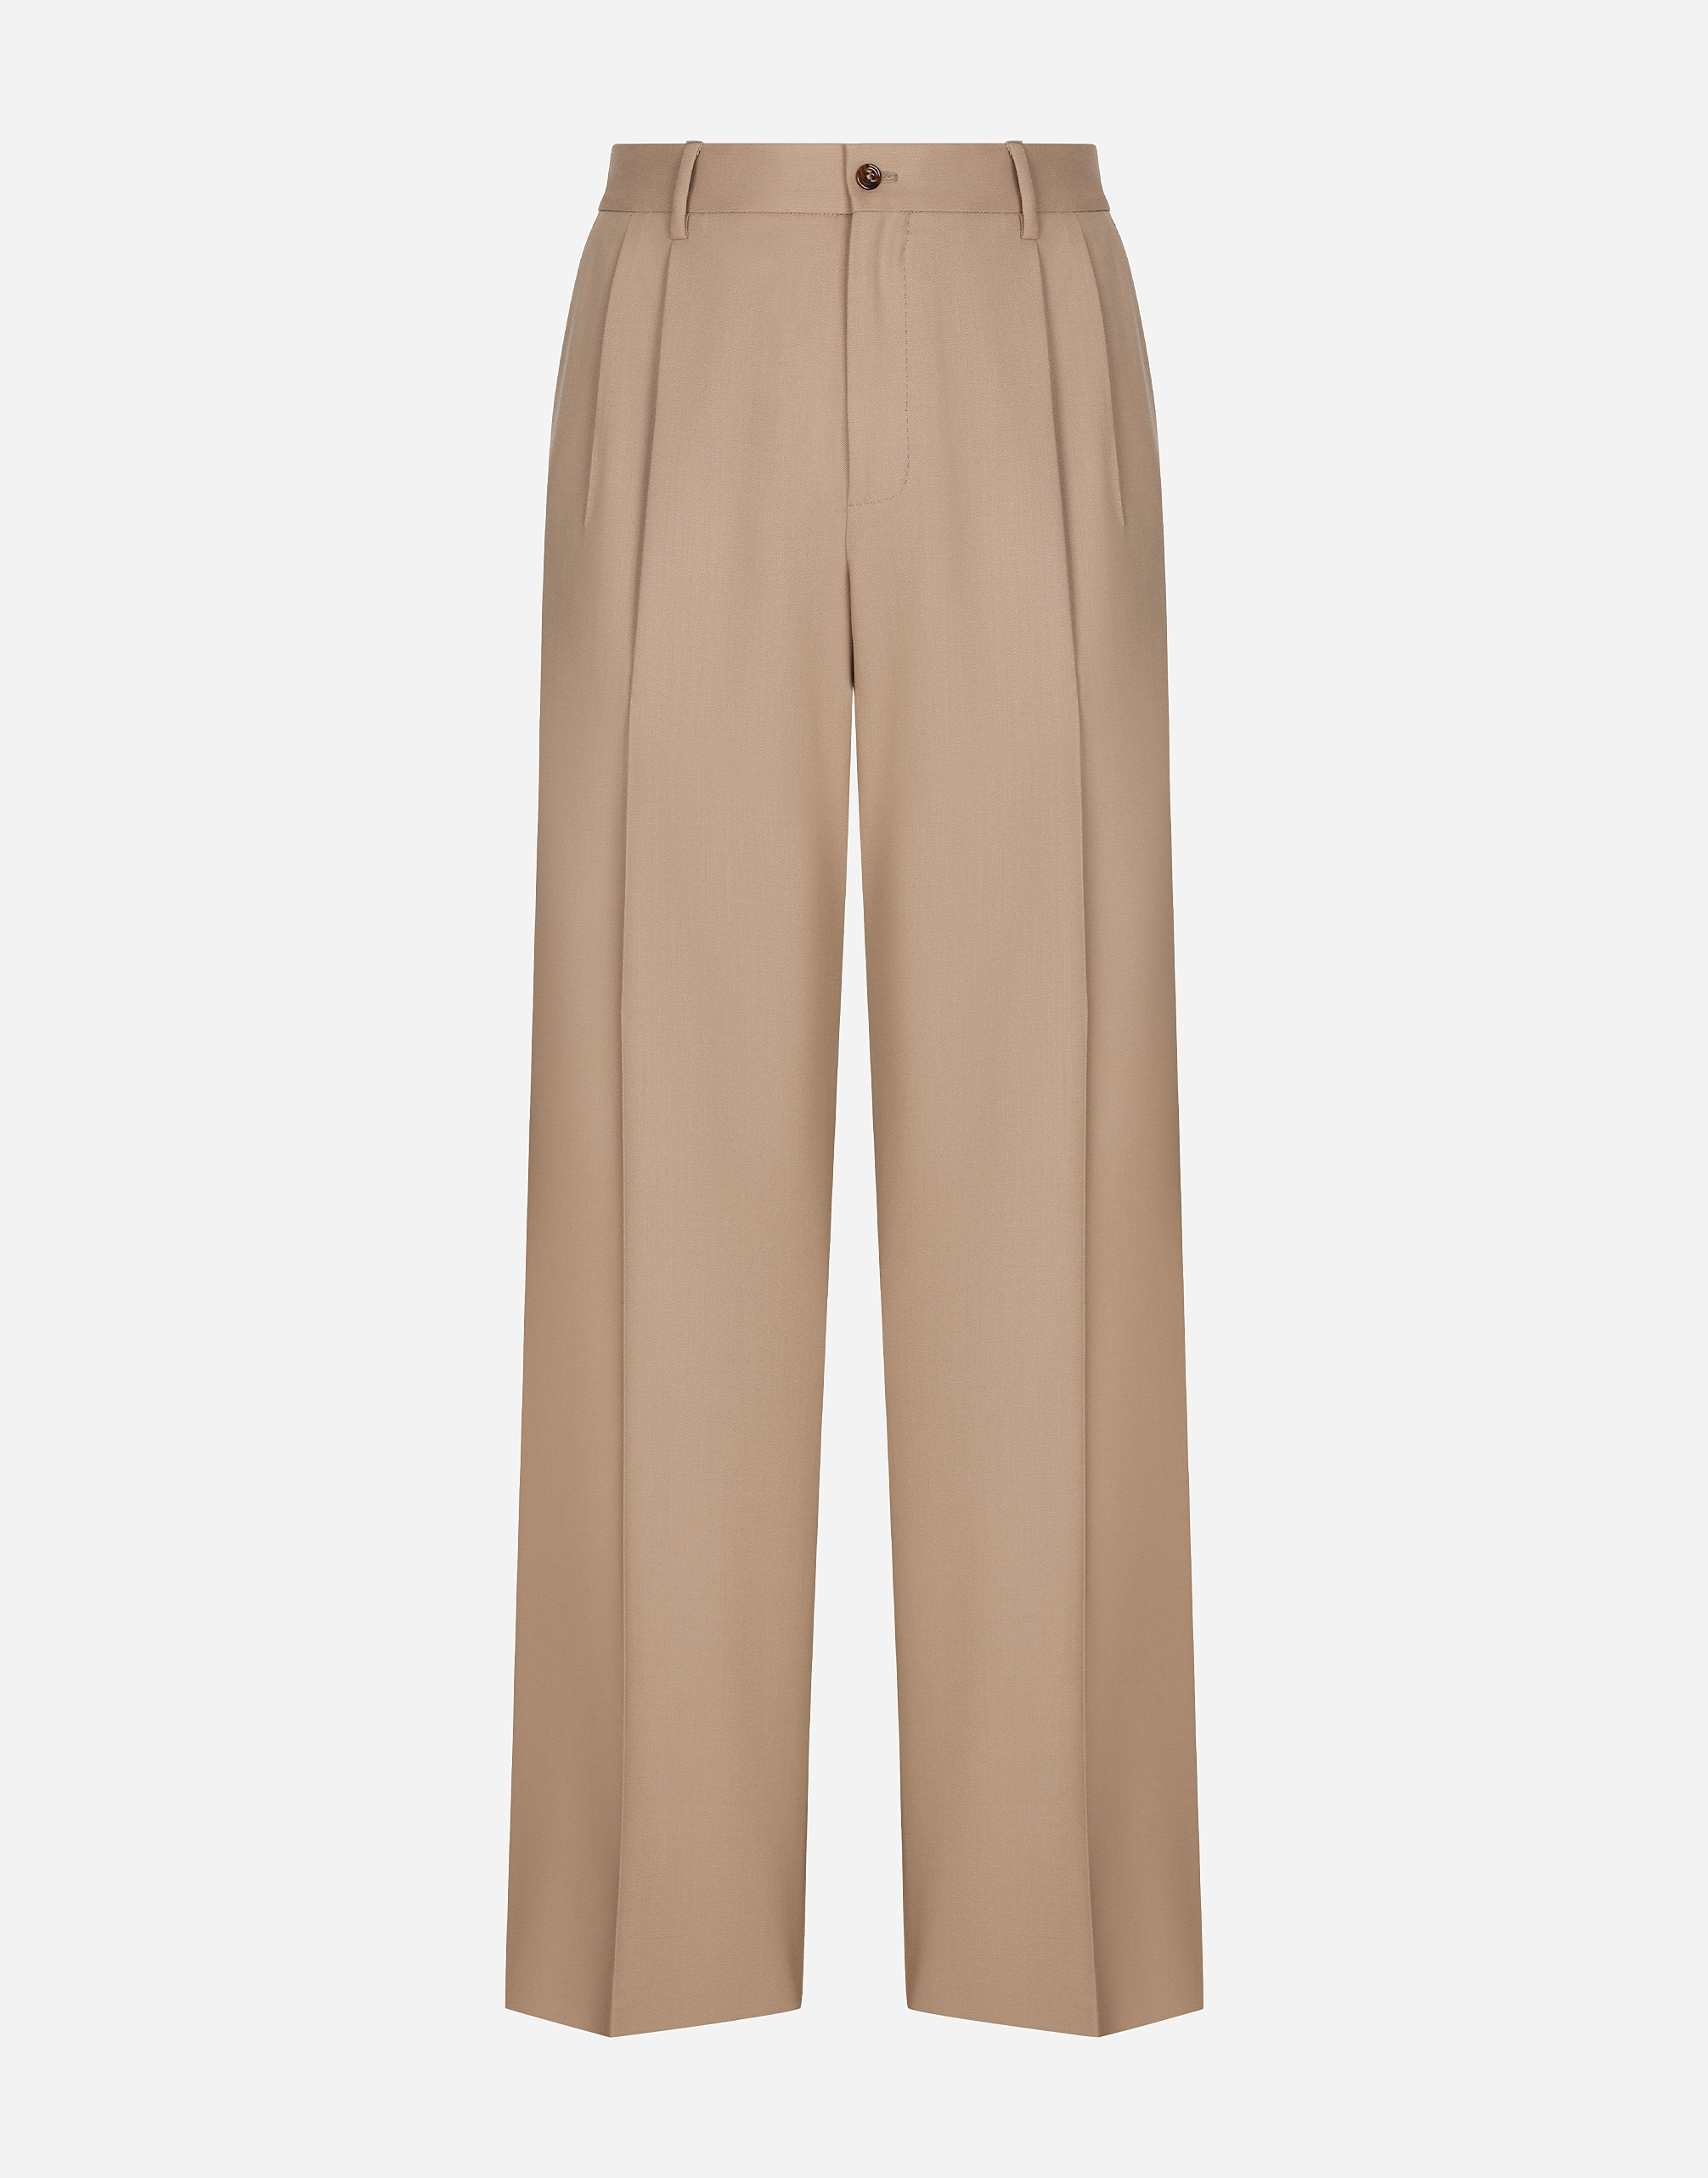 Stretch wool pants with straight leg in Pale Pink